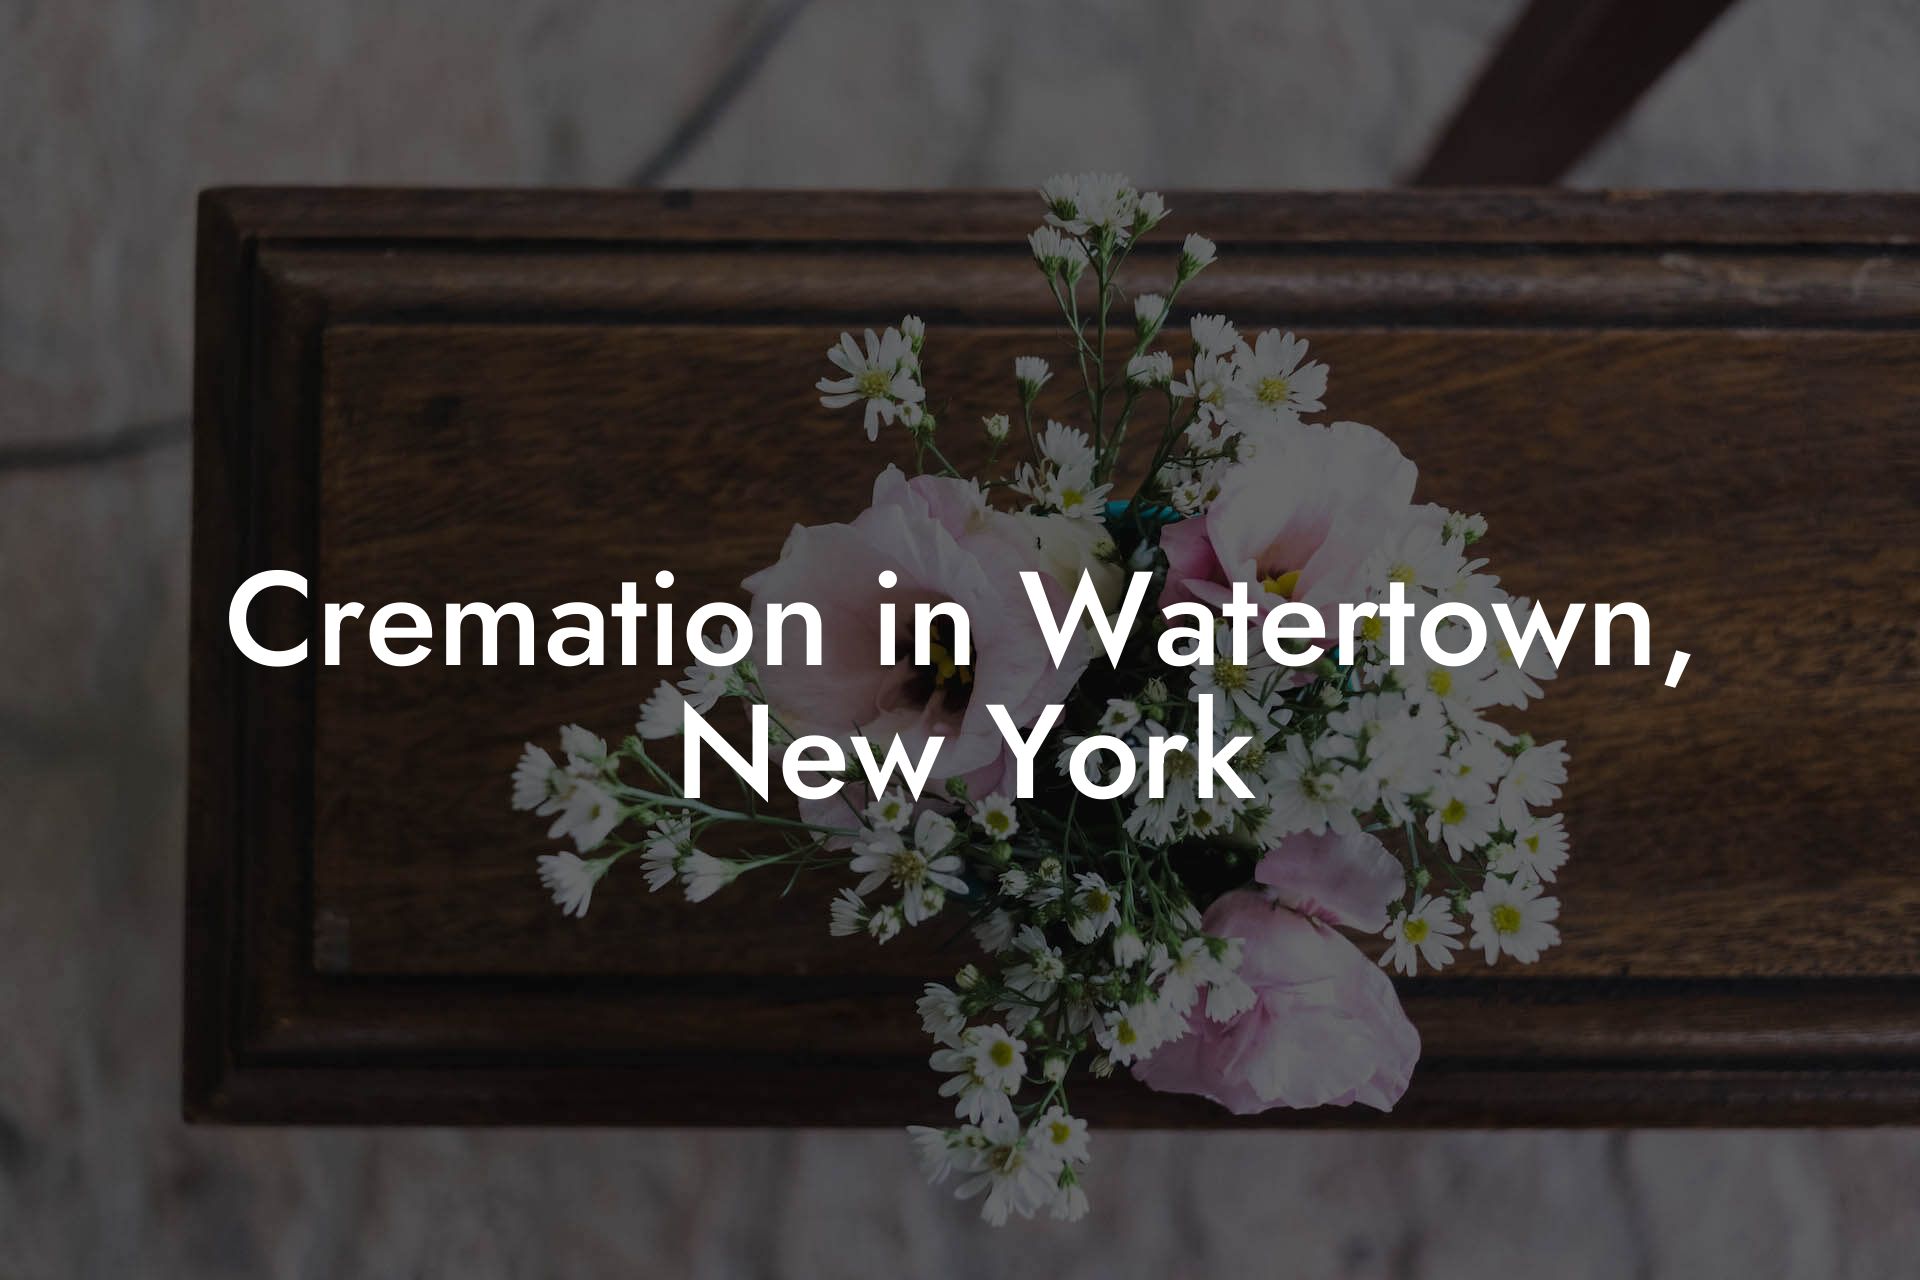 Cremation in Watertown, New York